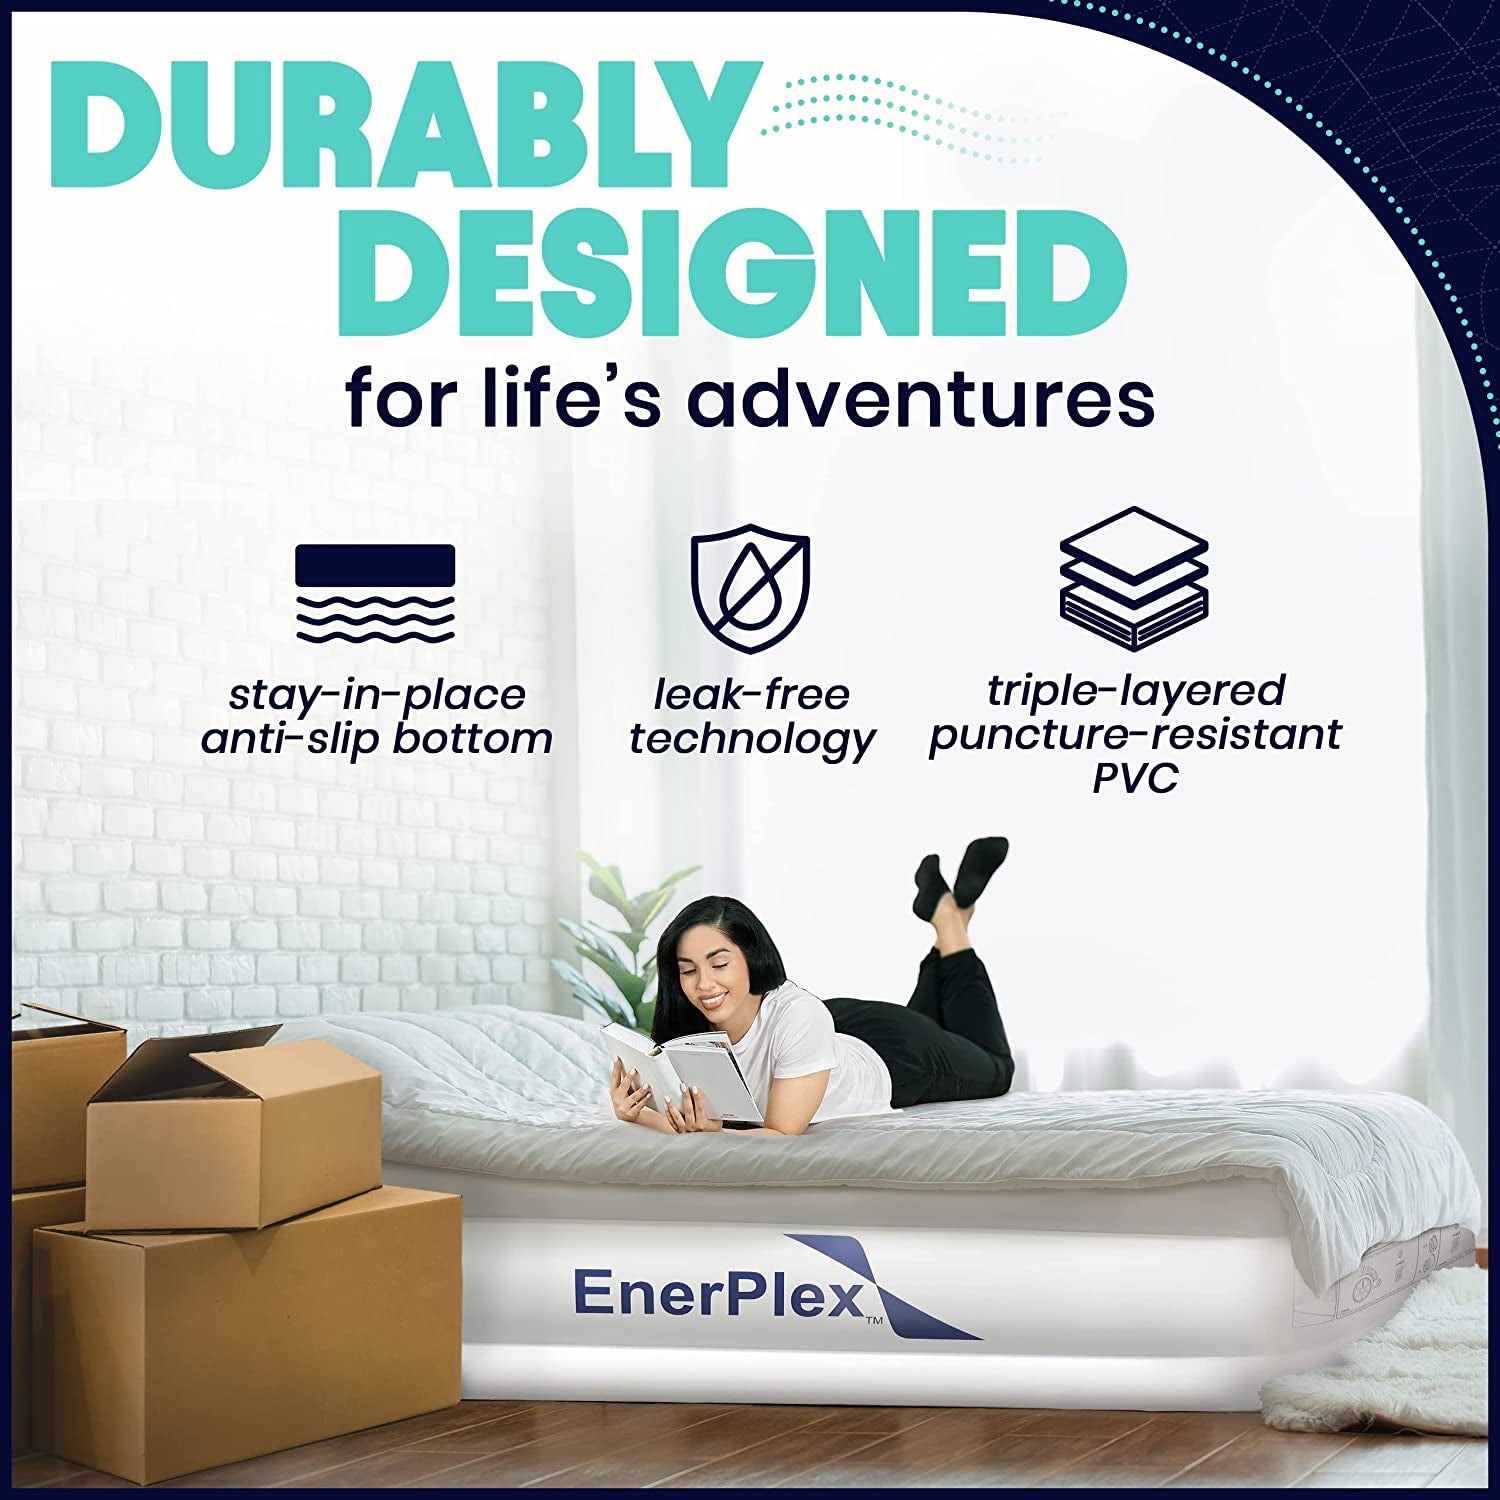 Air Mattress with Built-In Pump - Double Height Inflatable Mattress for Camping, Home & Portable Travel - Durable Blow up Bed with Dual Pump - Easy to Inflate/Quick Set UP